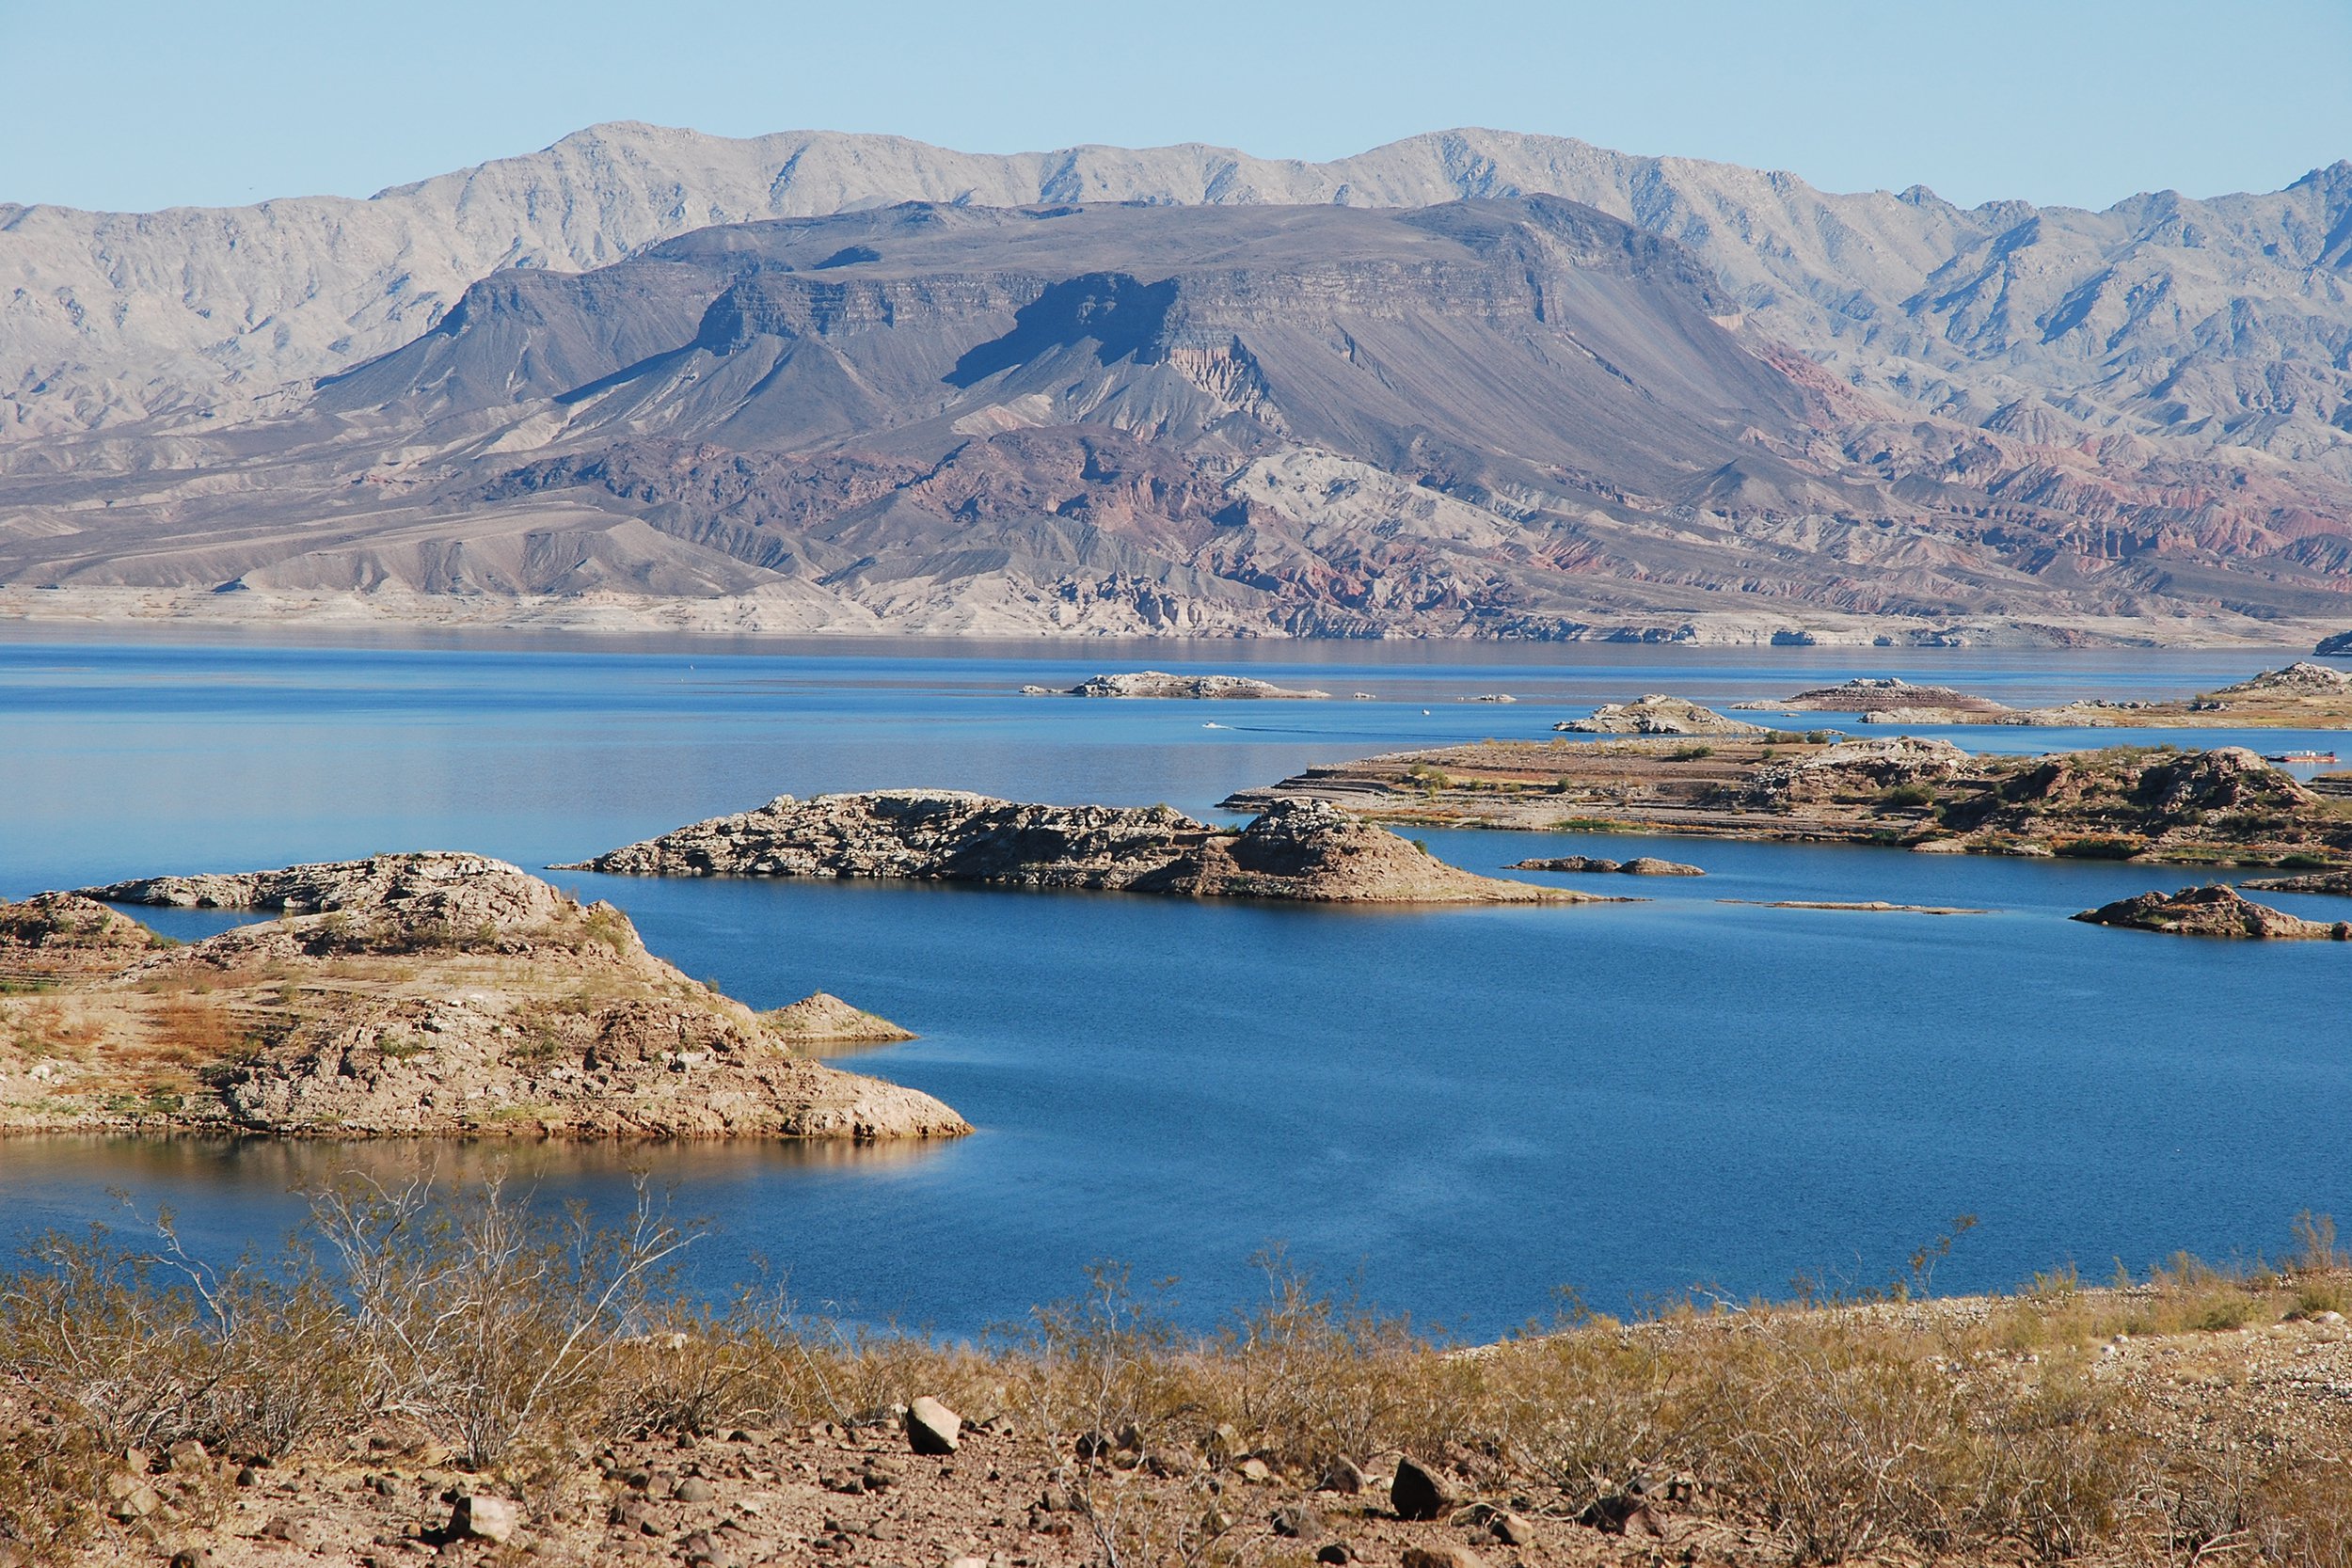 <p>Close to Las Vegas, <a href="https://www.ndow.org/Bodies_Of_Water/Lake_Mead/">Lake Mead</a> straddles the border between Arizona and Nevada. Anglers will find the massive lake is teeming with smallmouth and largemouth bass, bluegill, tilapia, channel catfish, stripers, green sunfish, and black crappie.</p>